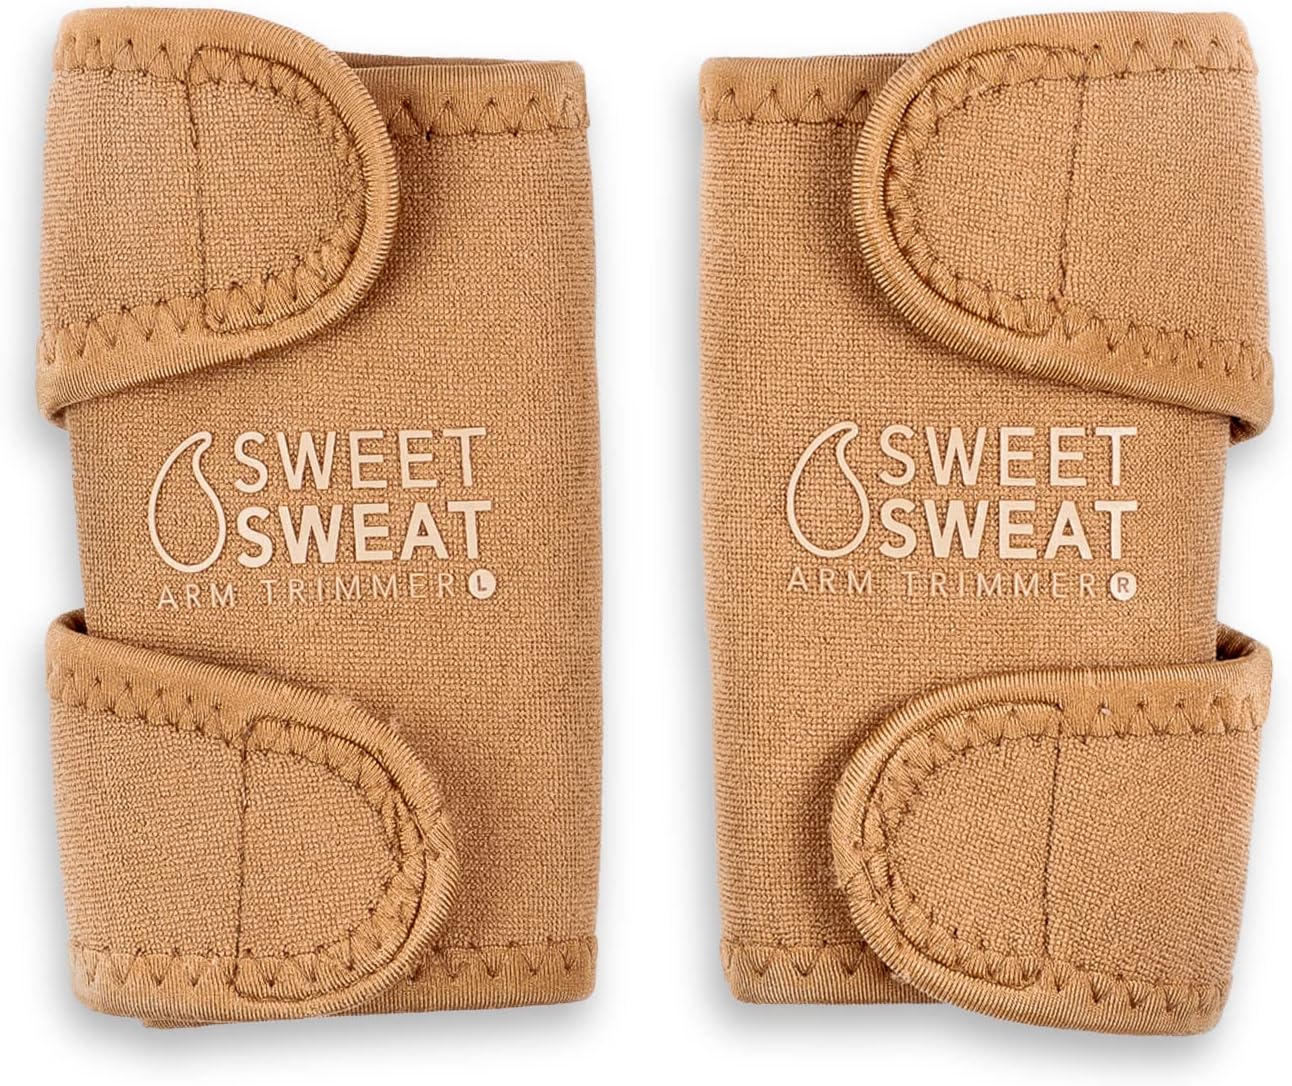 Sweet Sweat Arm Trimmers for Men & Women Review